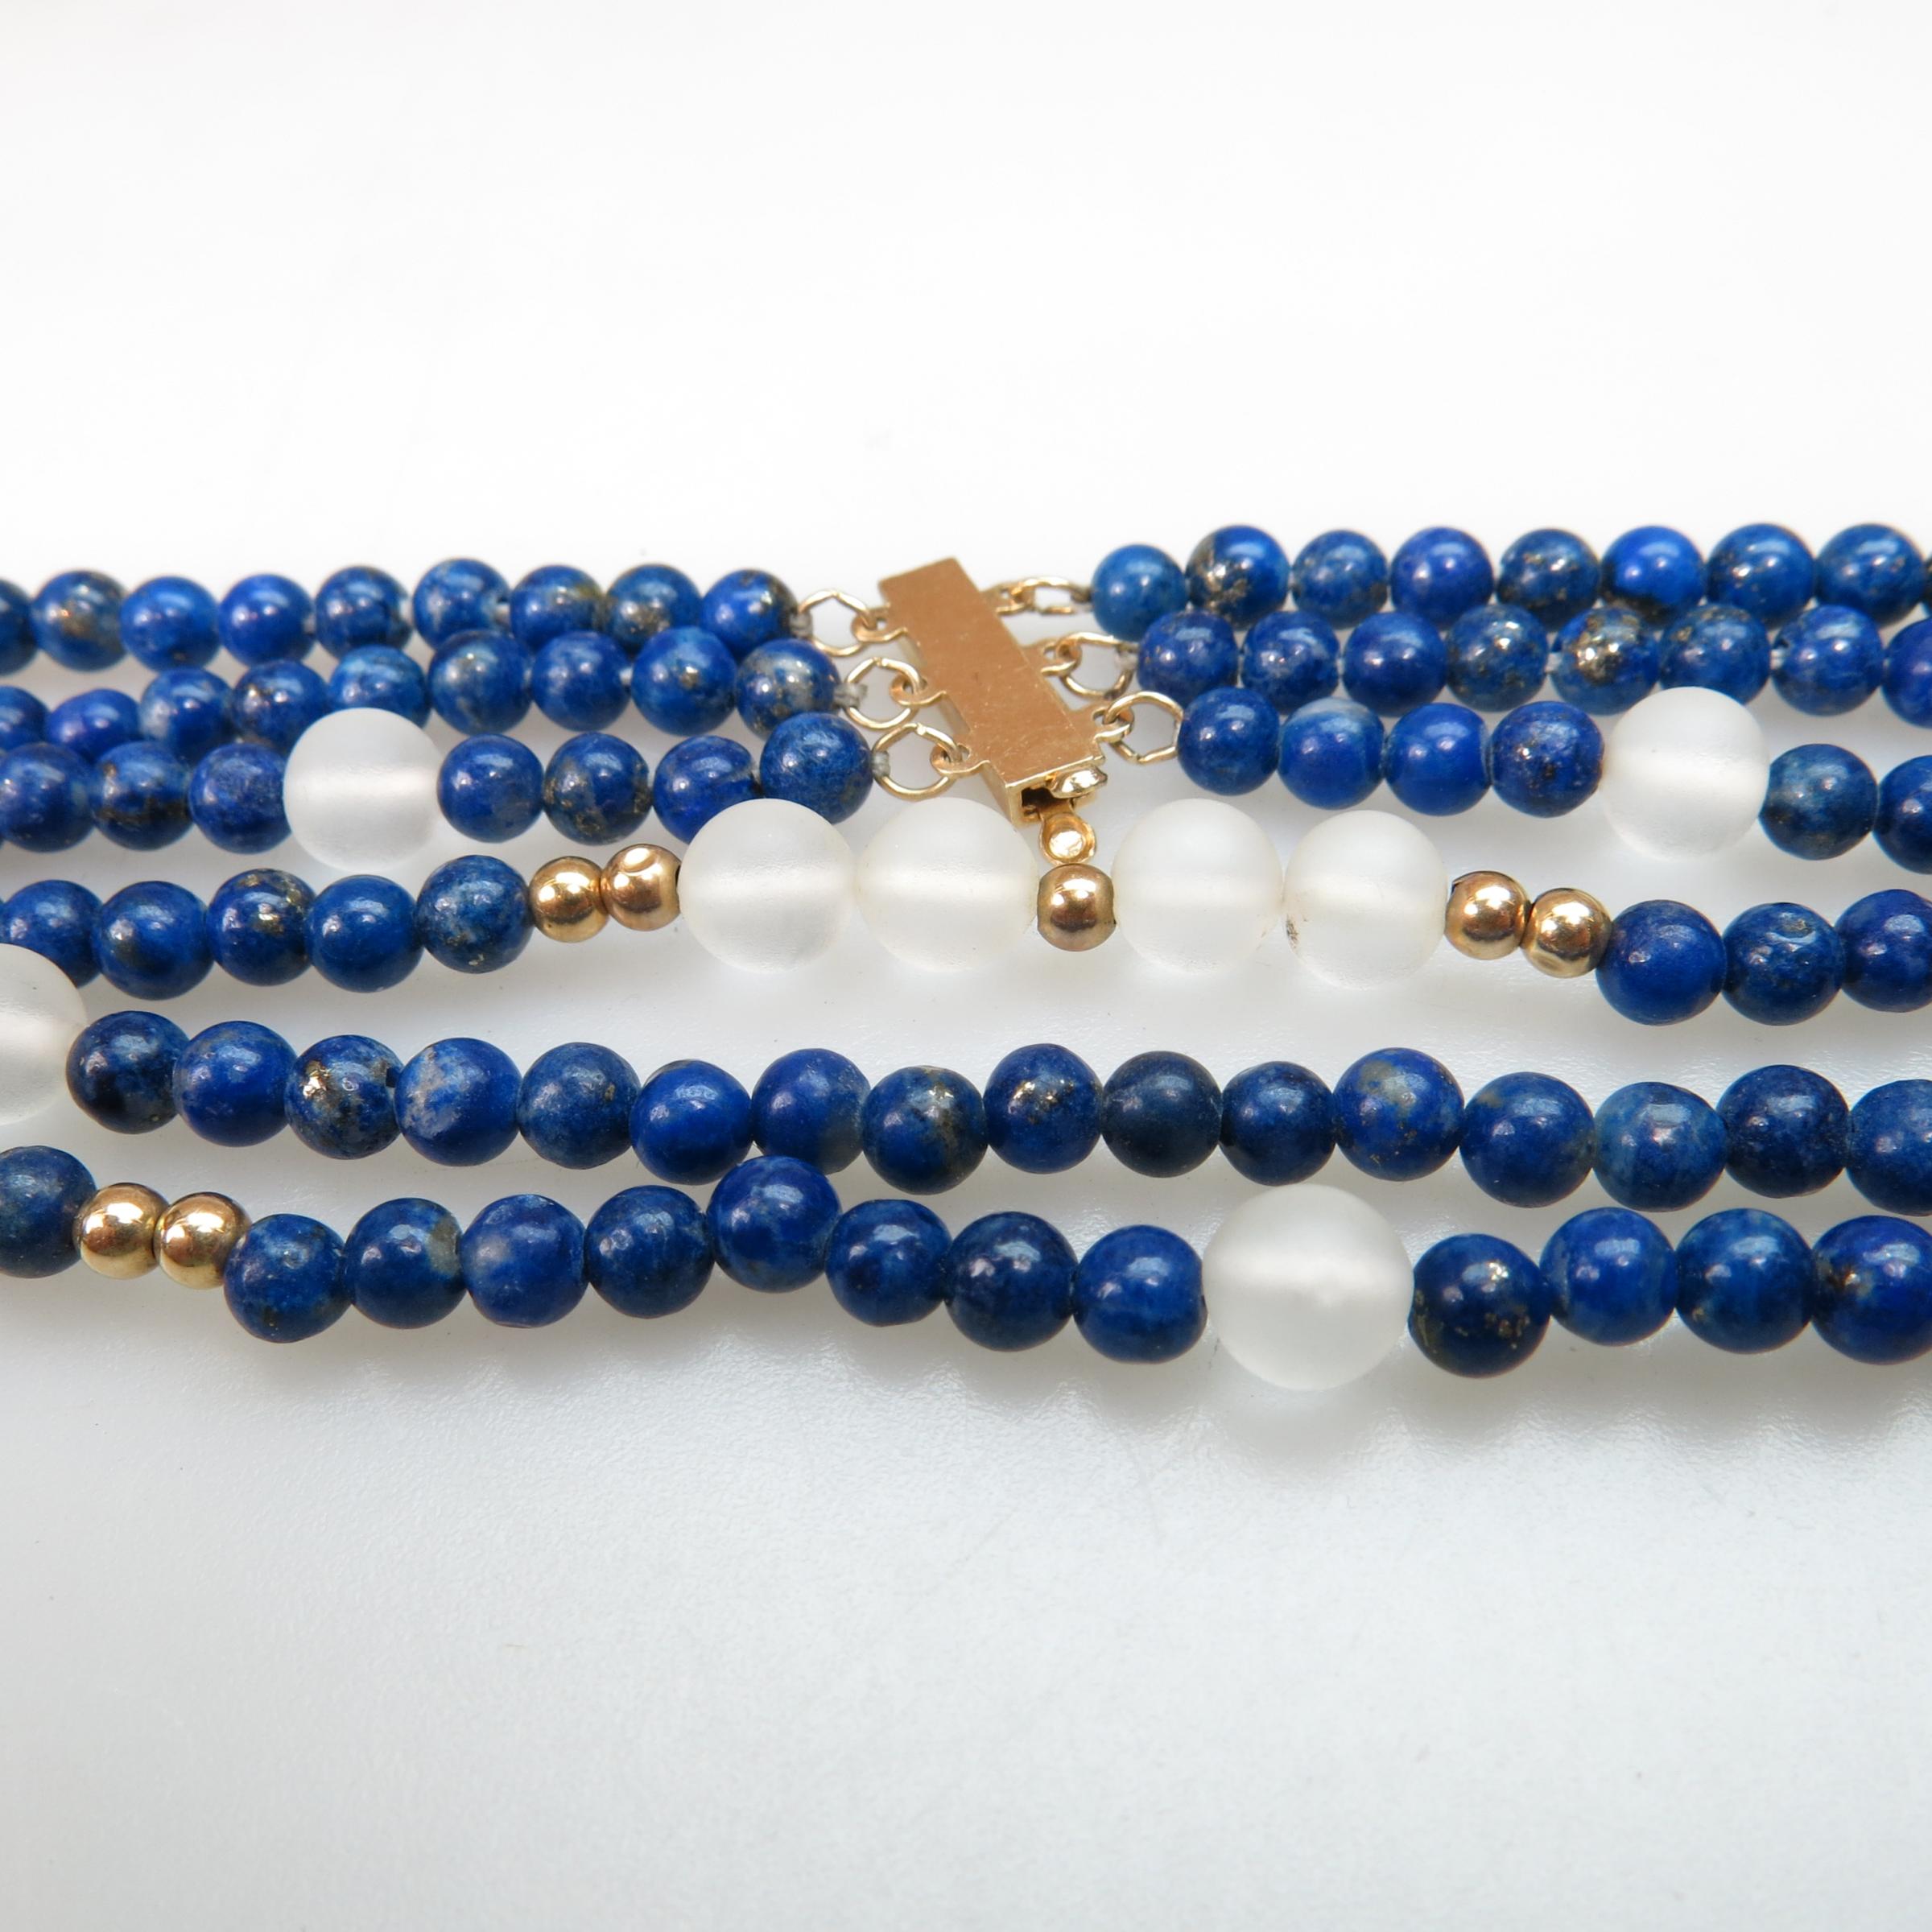 Triple Strand Bead Necklace